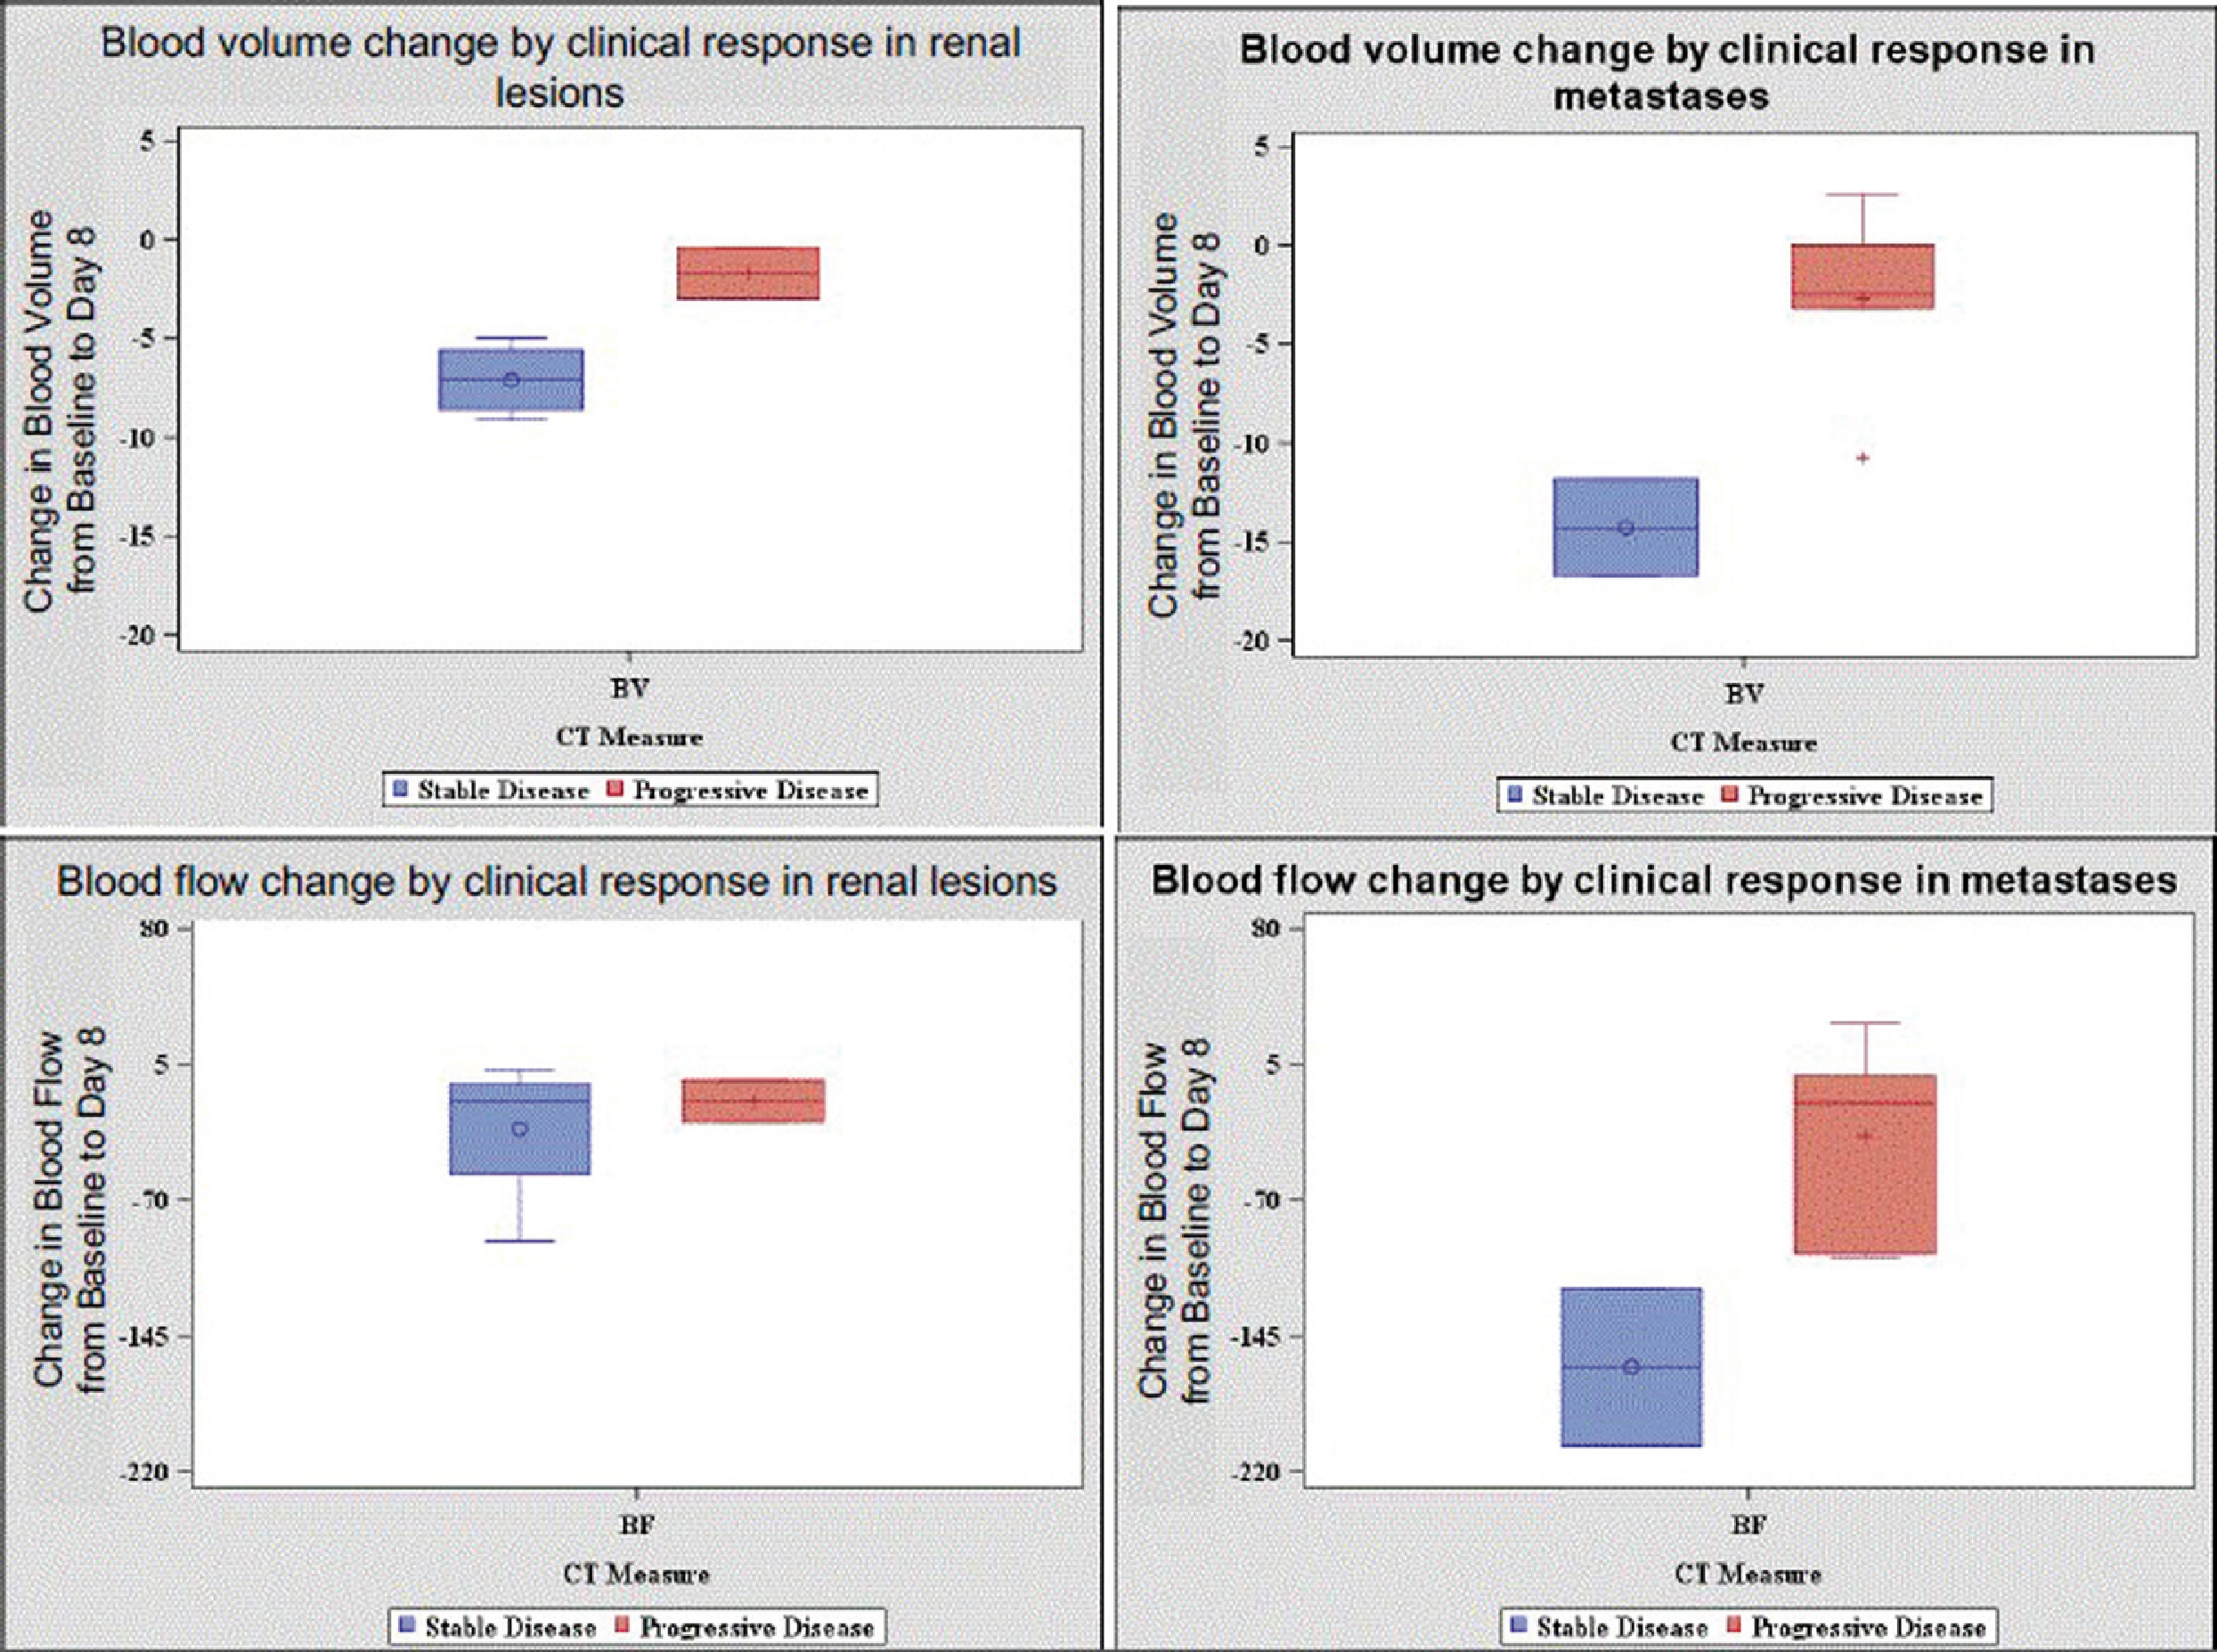 Changes in Blood Volume and Blood Flow by Clinical Response and Tumor Location